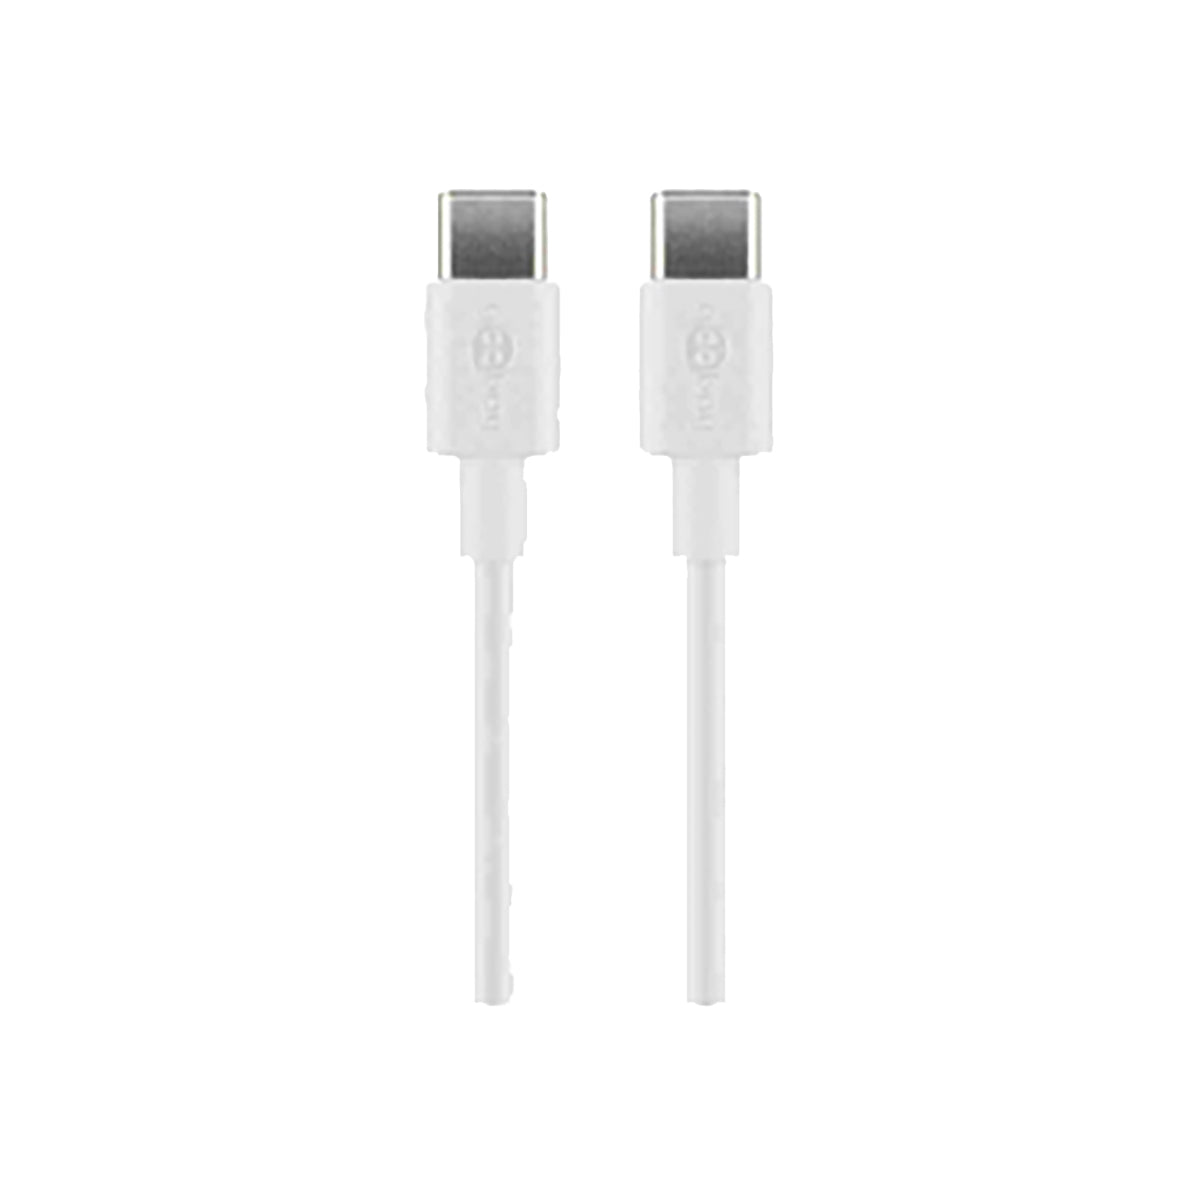 Goobay USB-C to USB-C Cable 1m for Smartphones/Tablets/Laptops - White